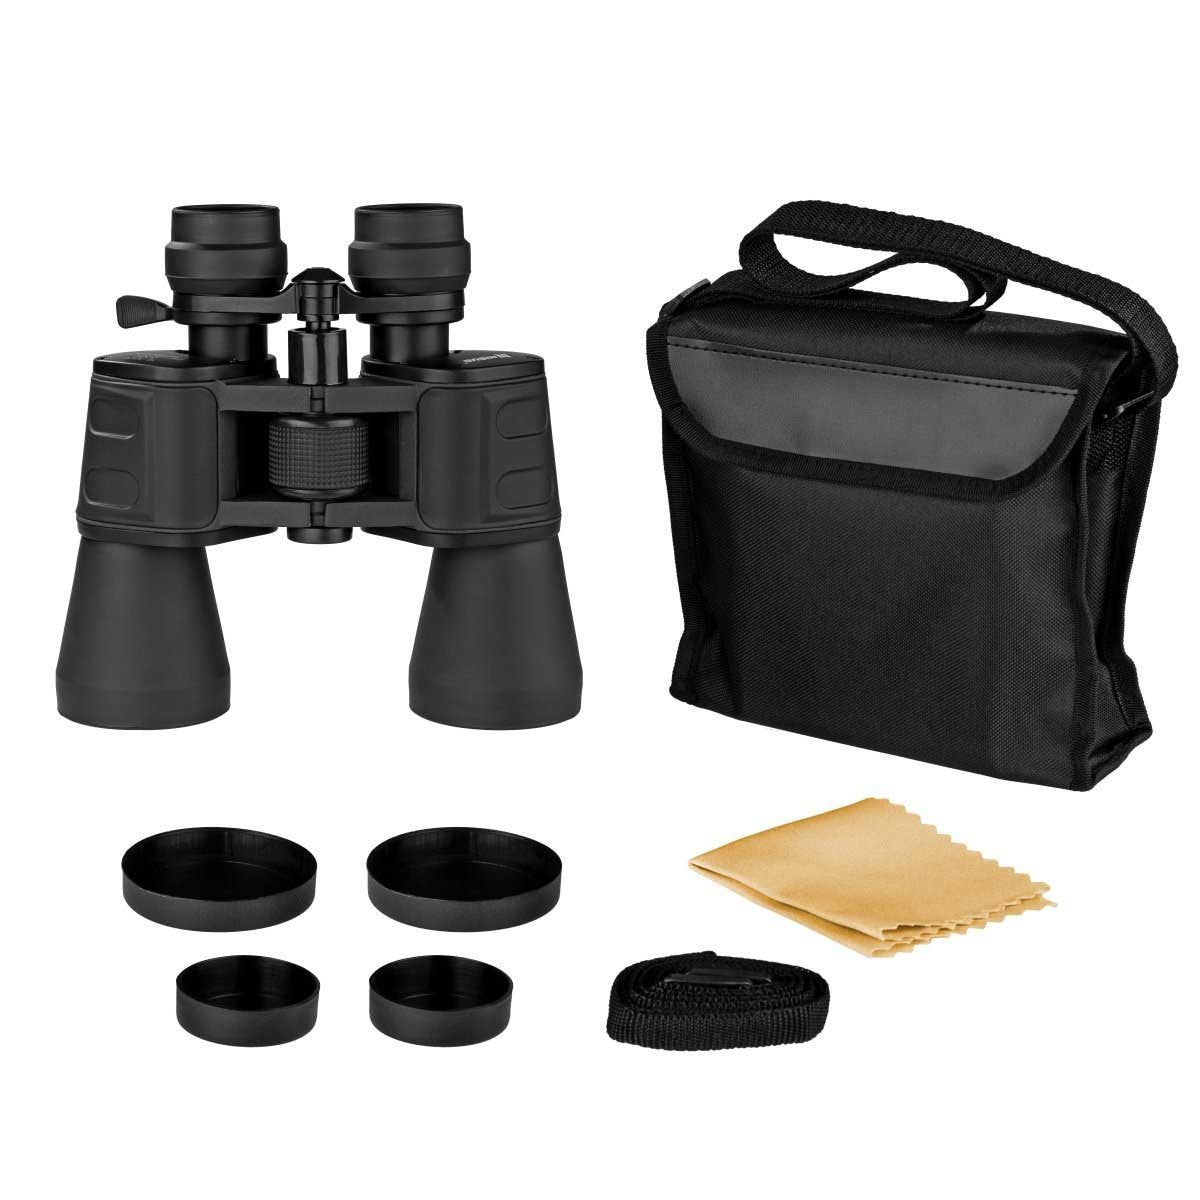 10x50 Nisus Compact Binocular Black Color with a Case and Shoulder Strap